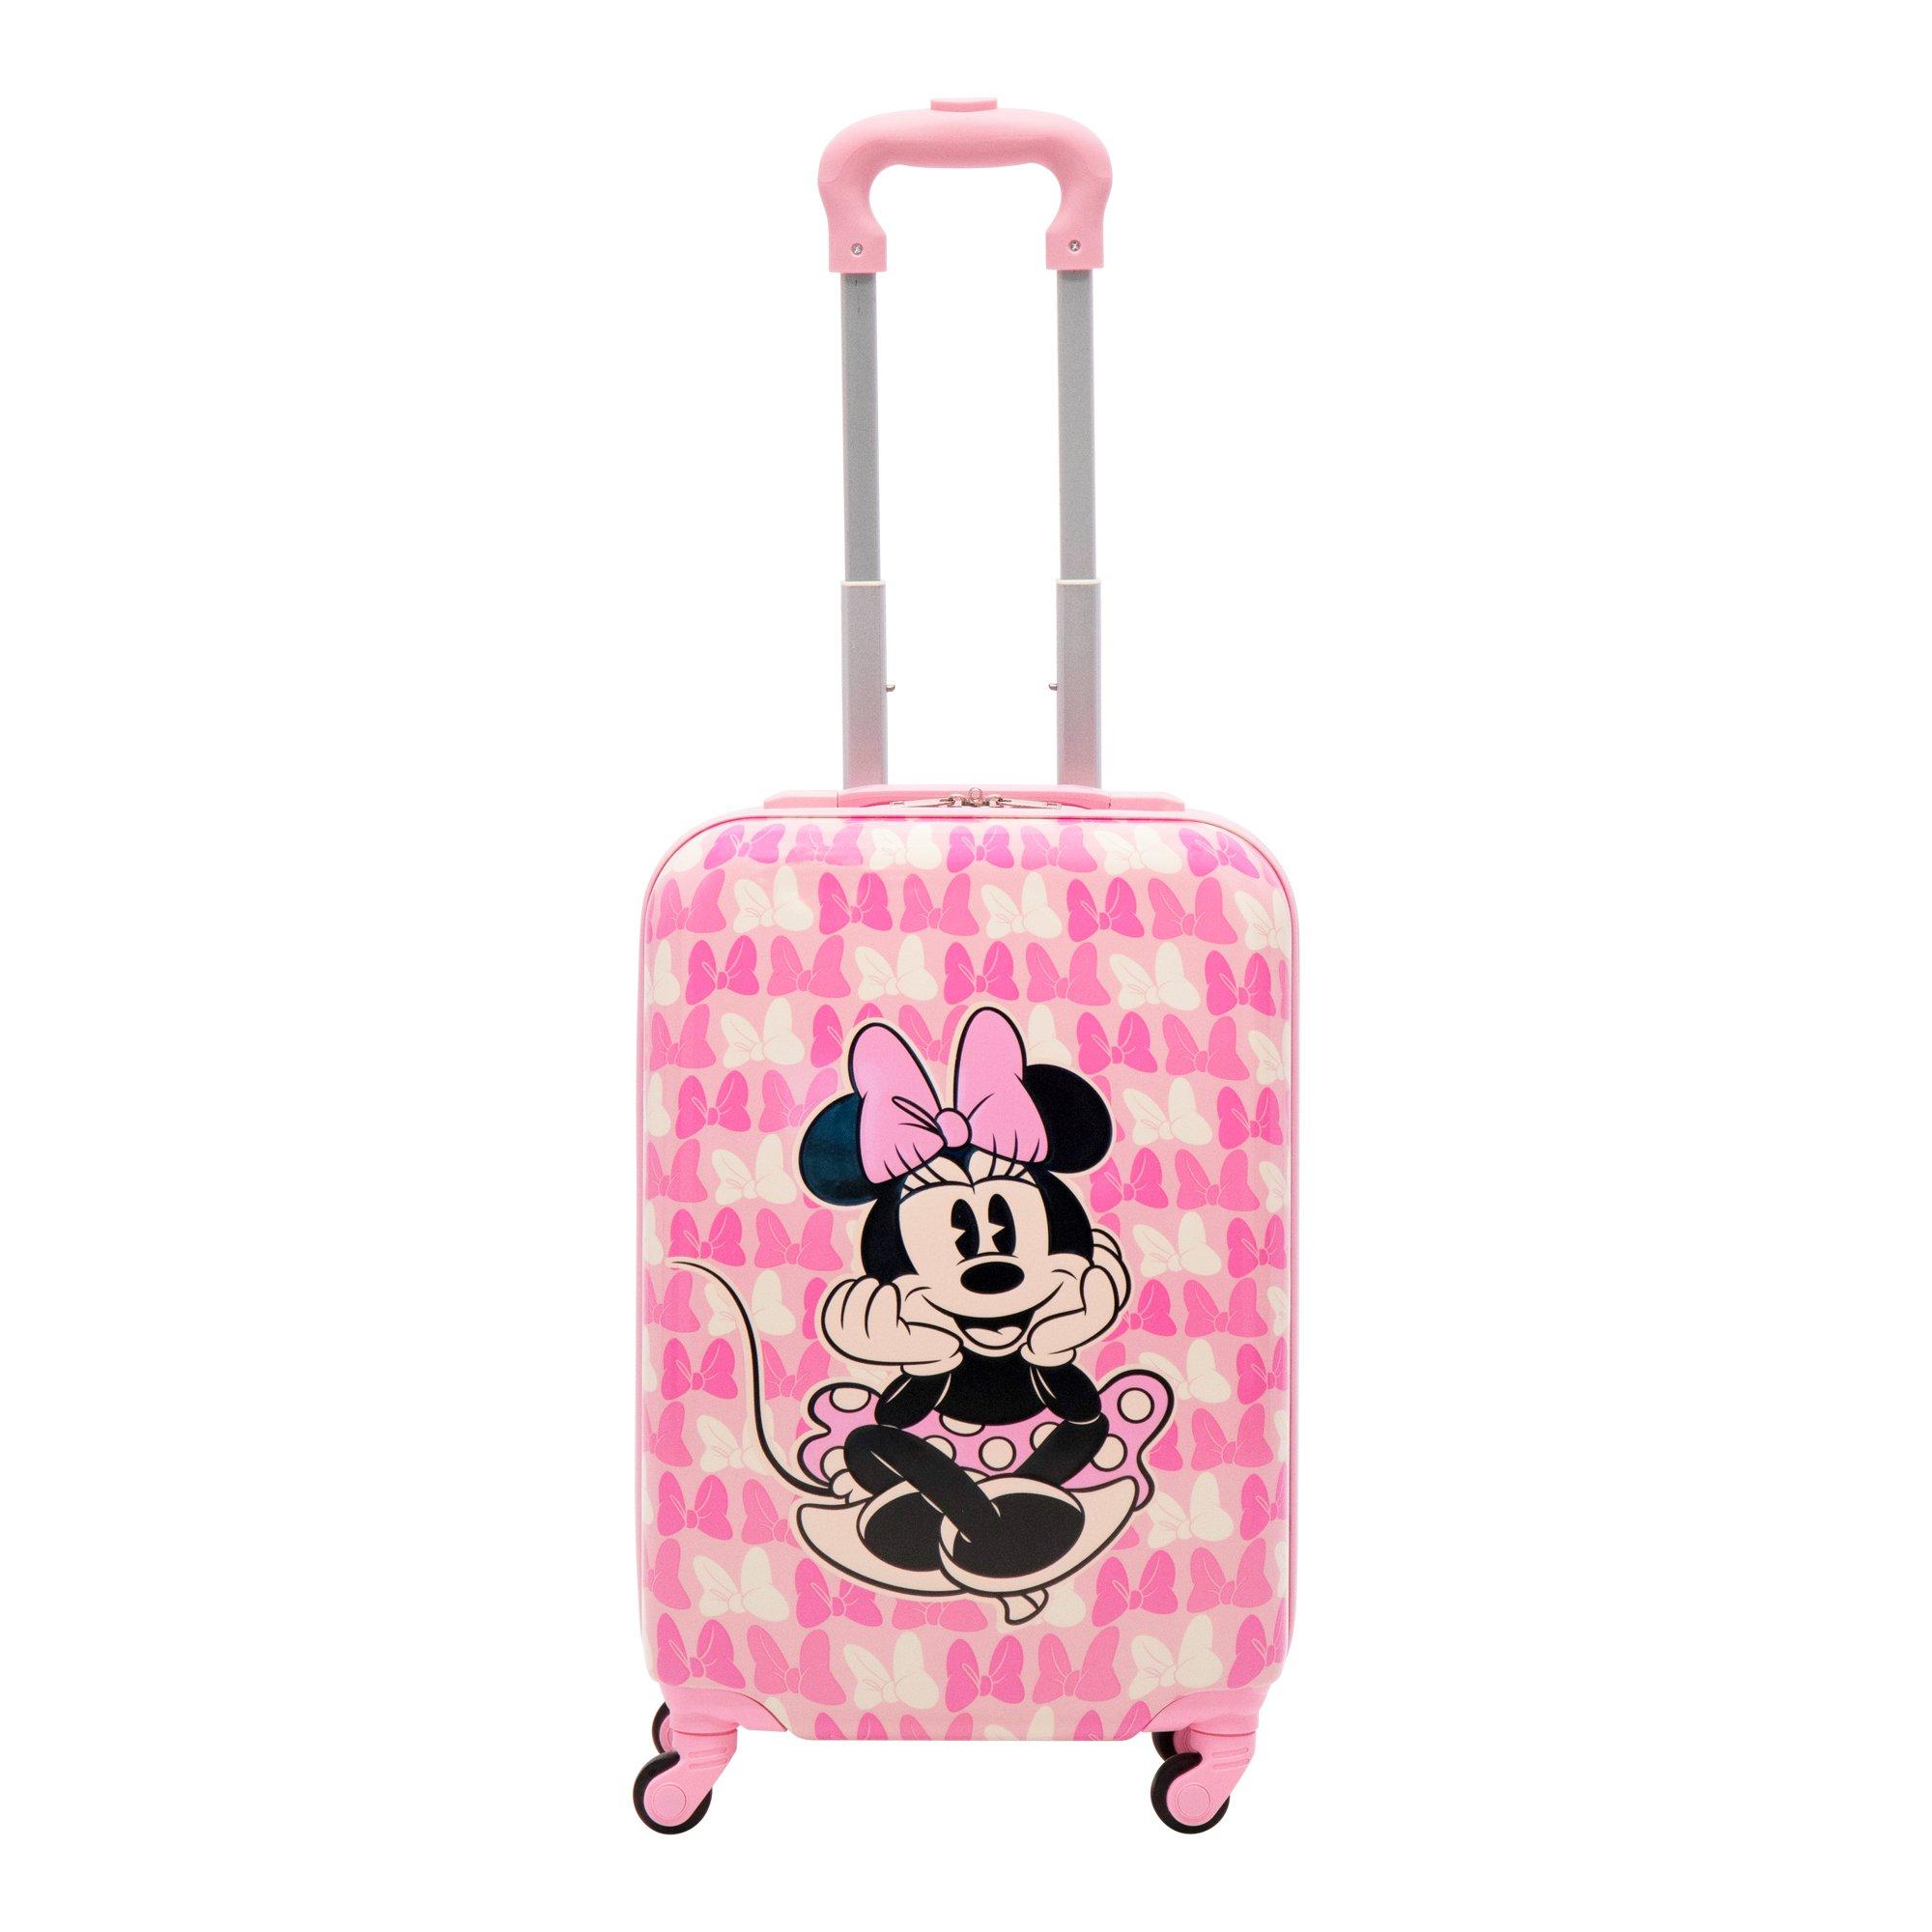 FUL Disney Minnie Mouse Bows Print Kids 21-in Hard-Sided Roller Luggage